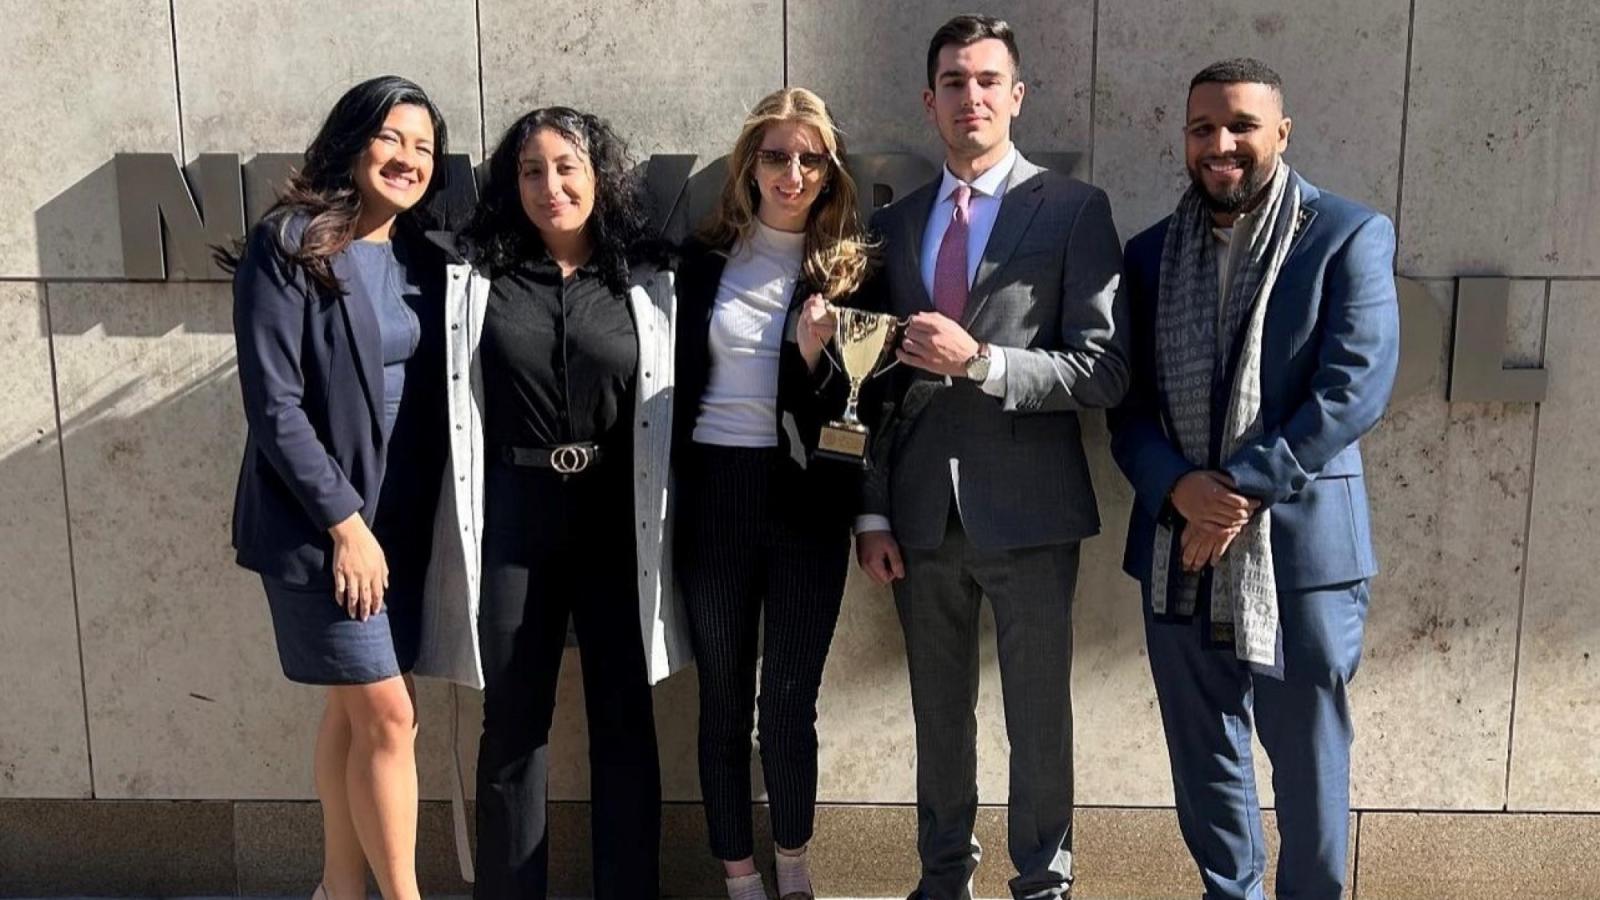 The Elisabeth Haub School of Law at Pace University students from the top ranked trial advocacy program